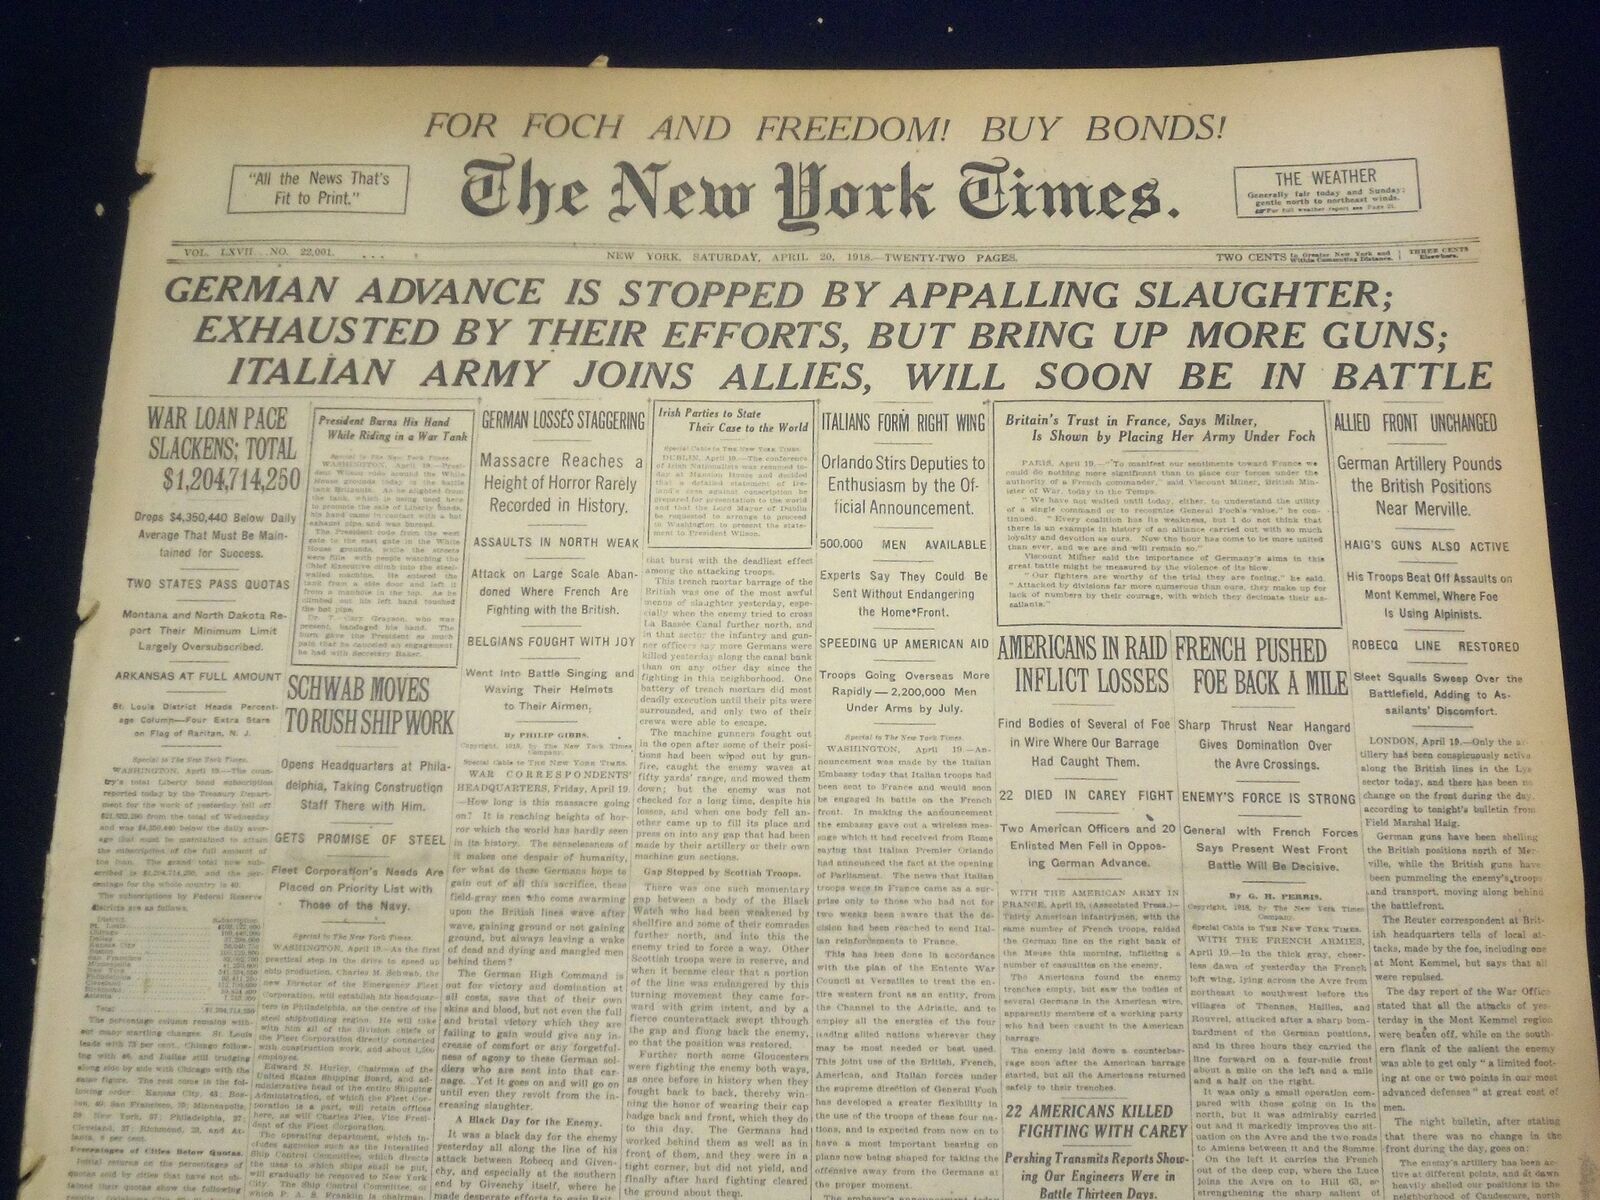 1918 APRIL 20 NEW YORK TIMES - GERMAN ADVANCE STOPPED BY SLAUGHTER - NT 8222